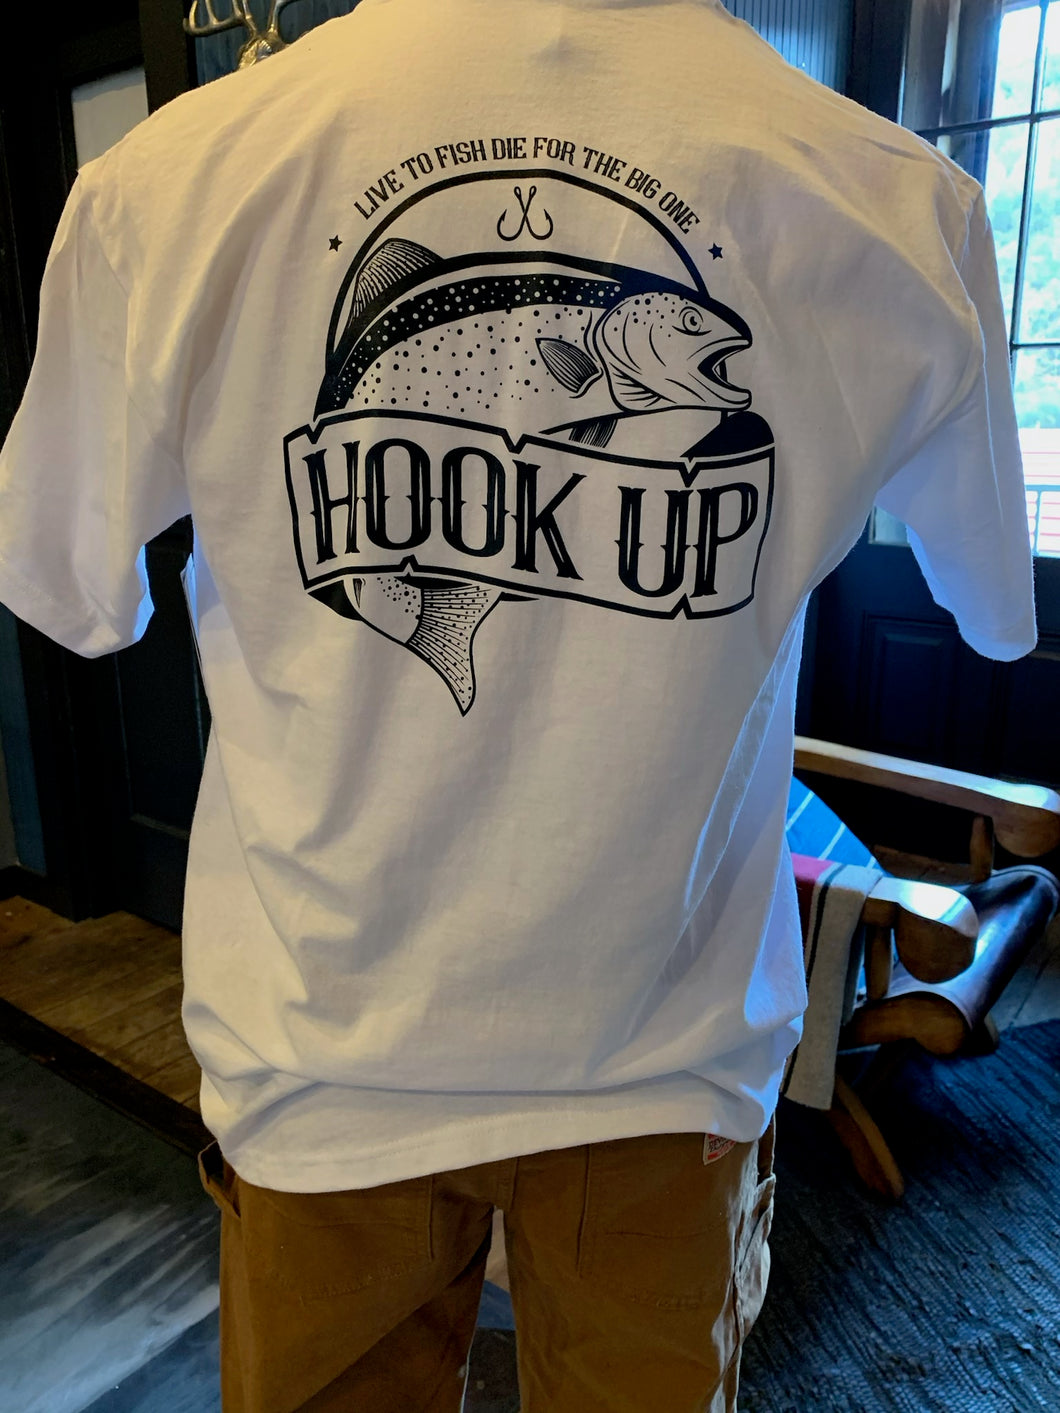 The Live to Fish Tee